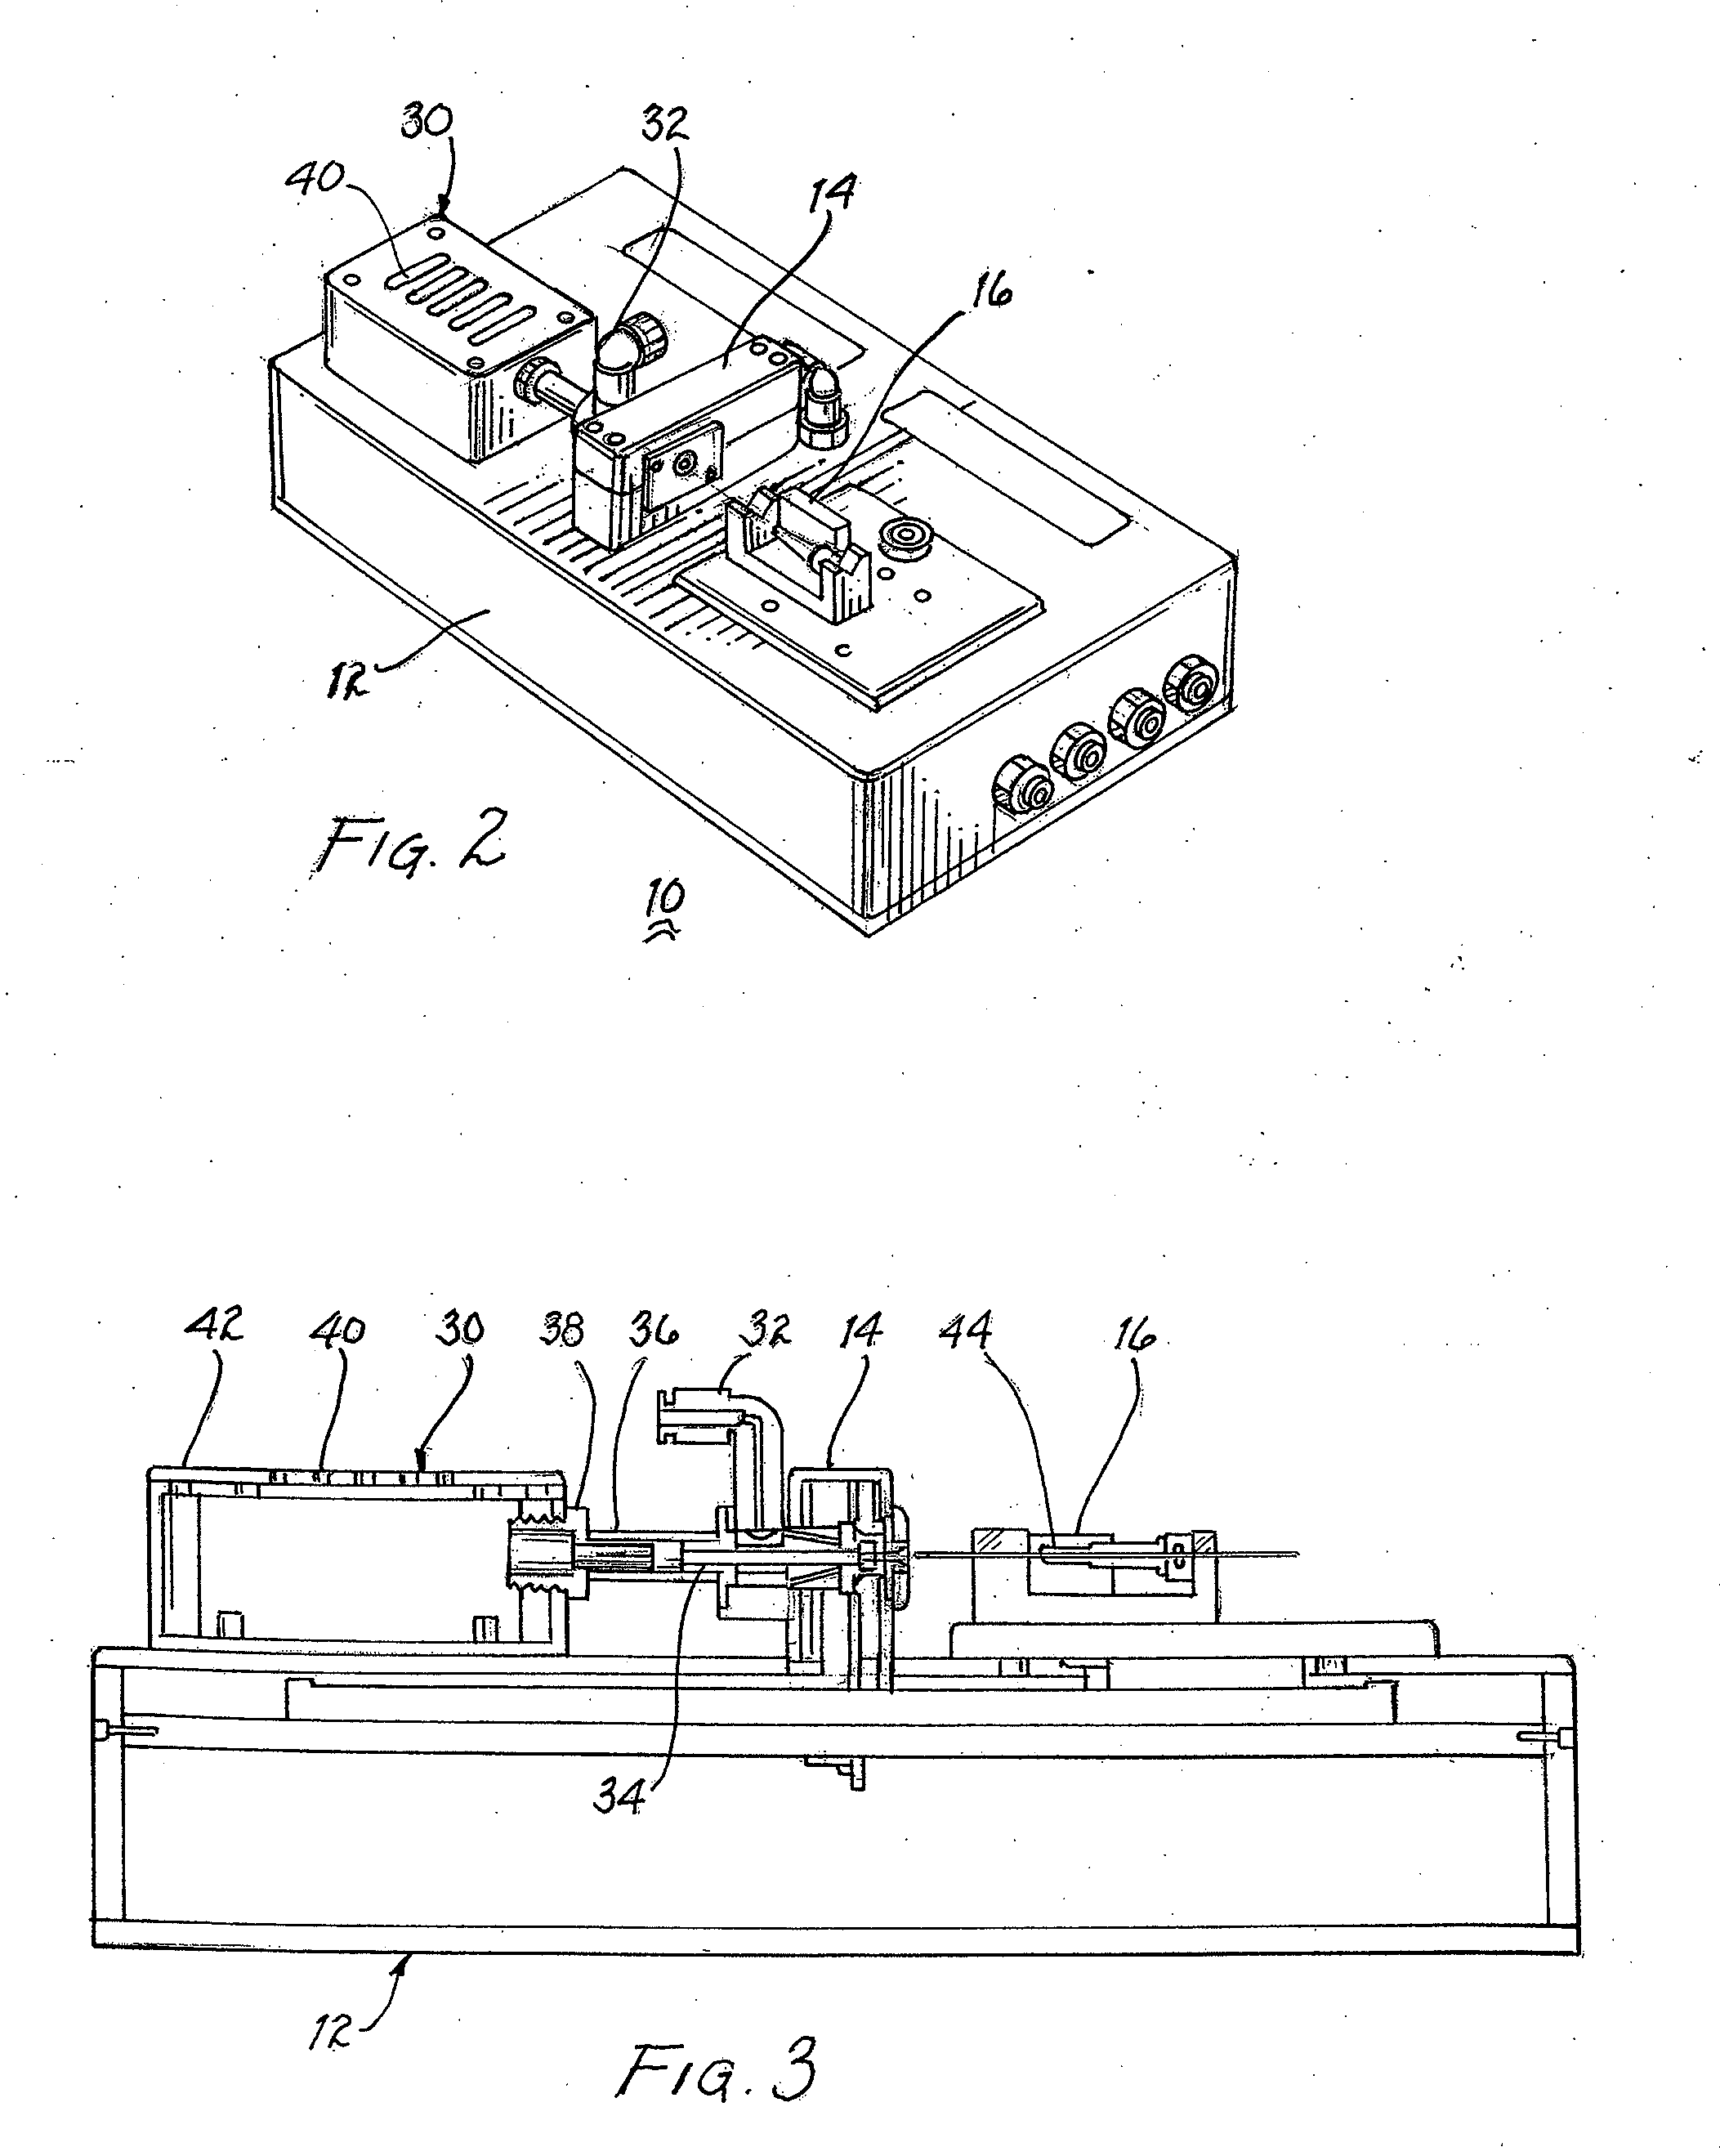 Apparatus for severing and collecting iv tubing tips